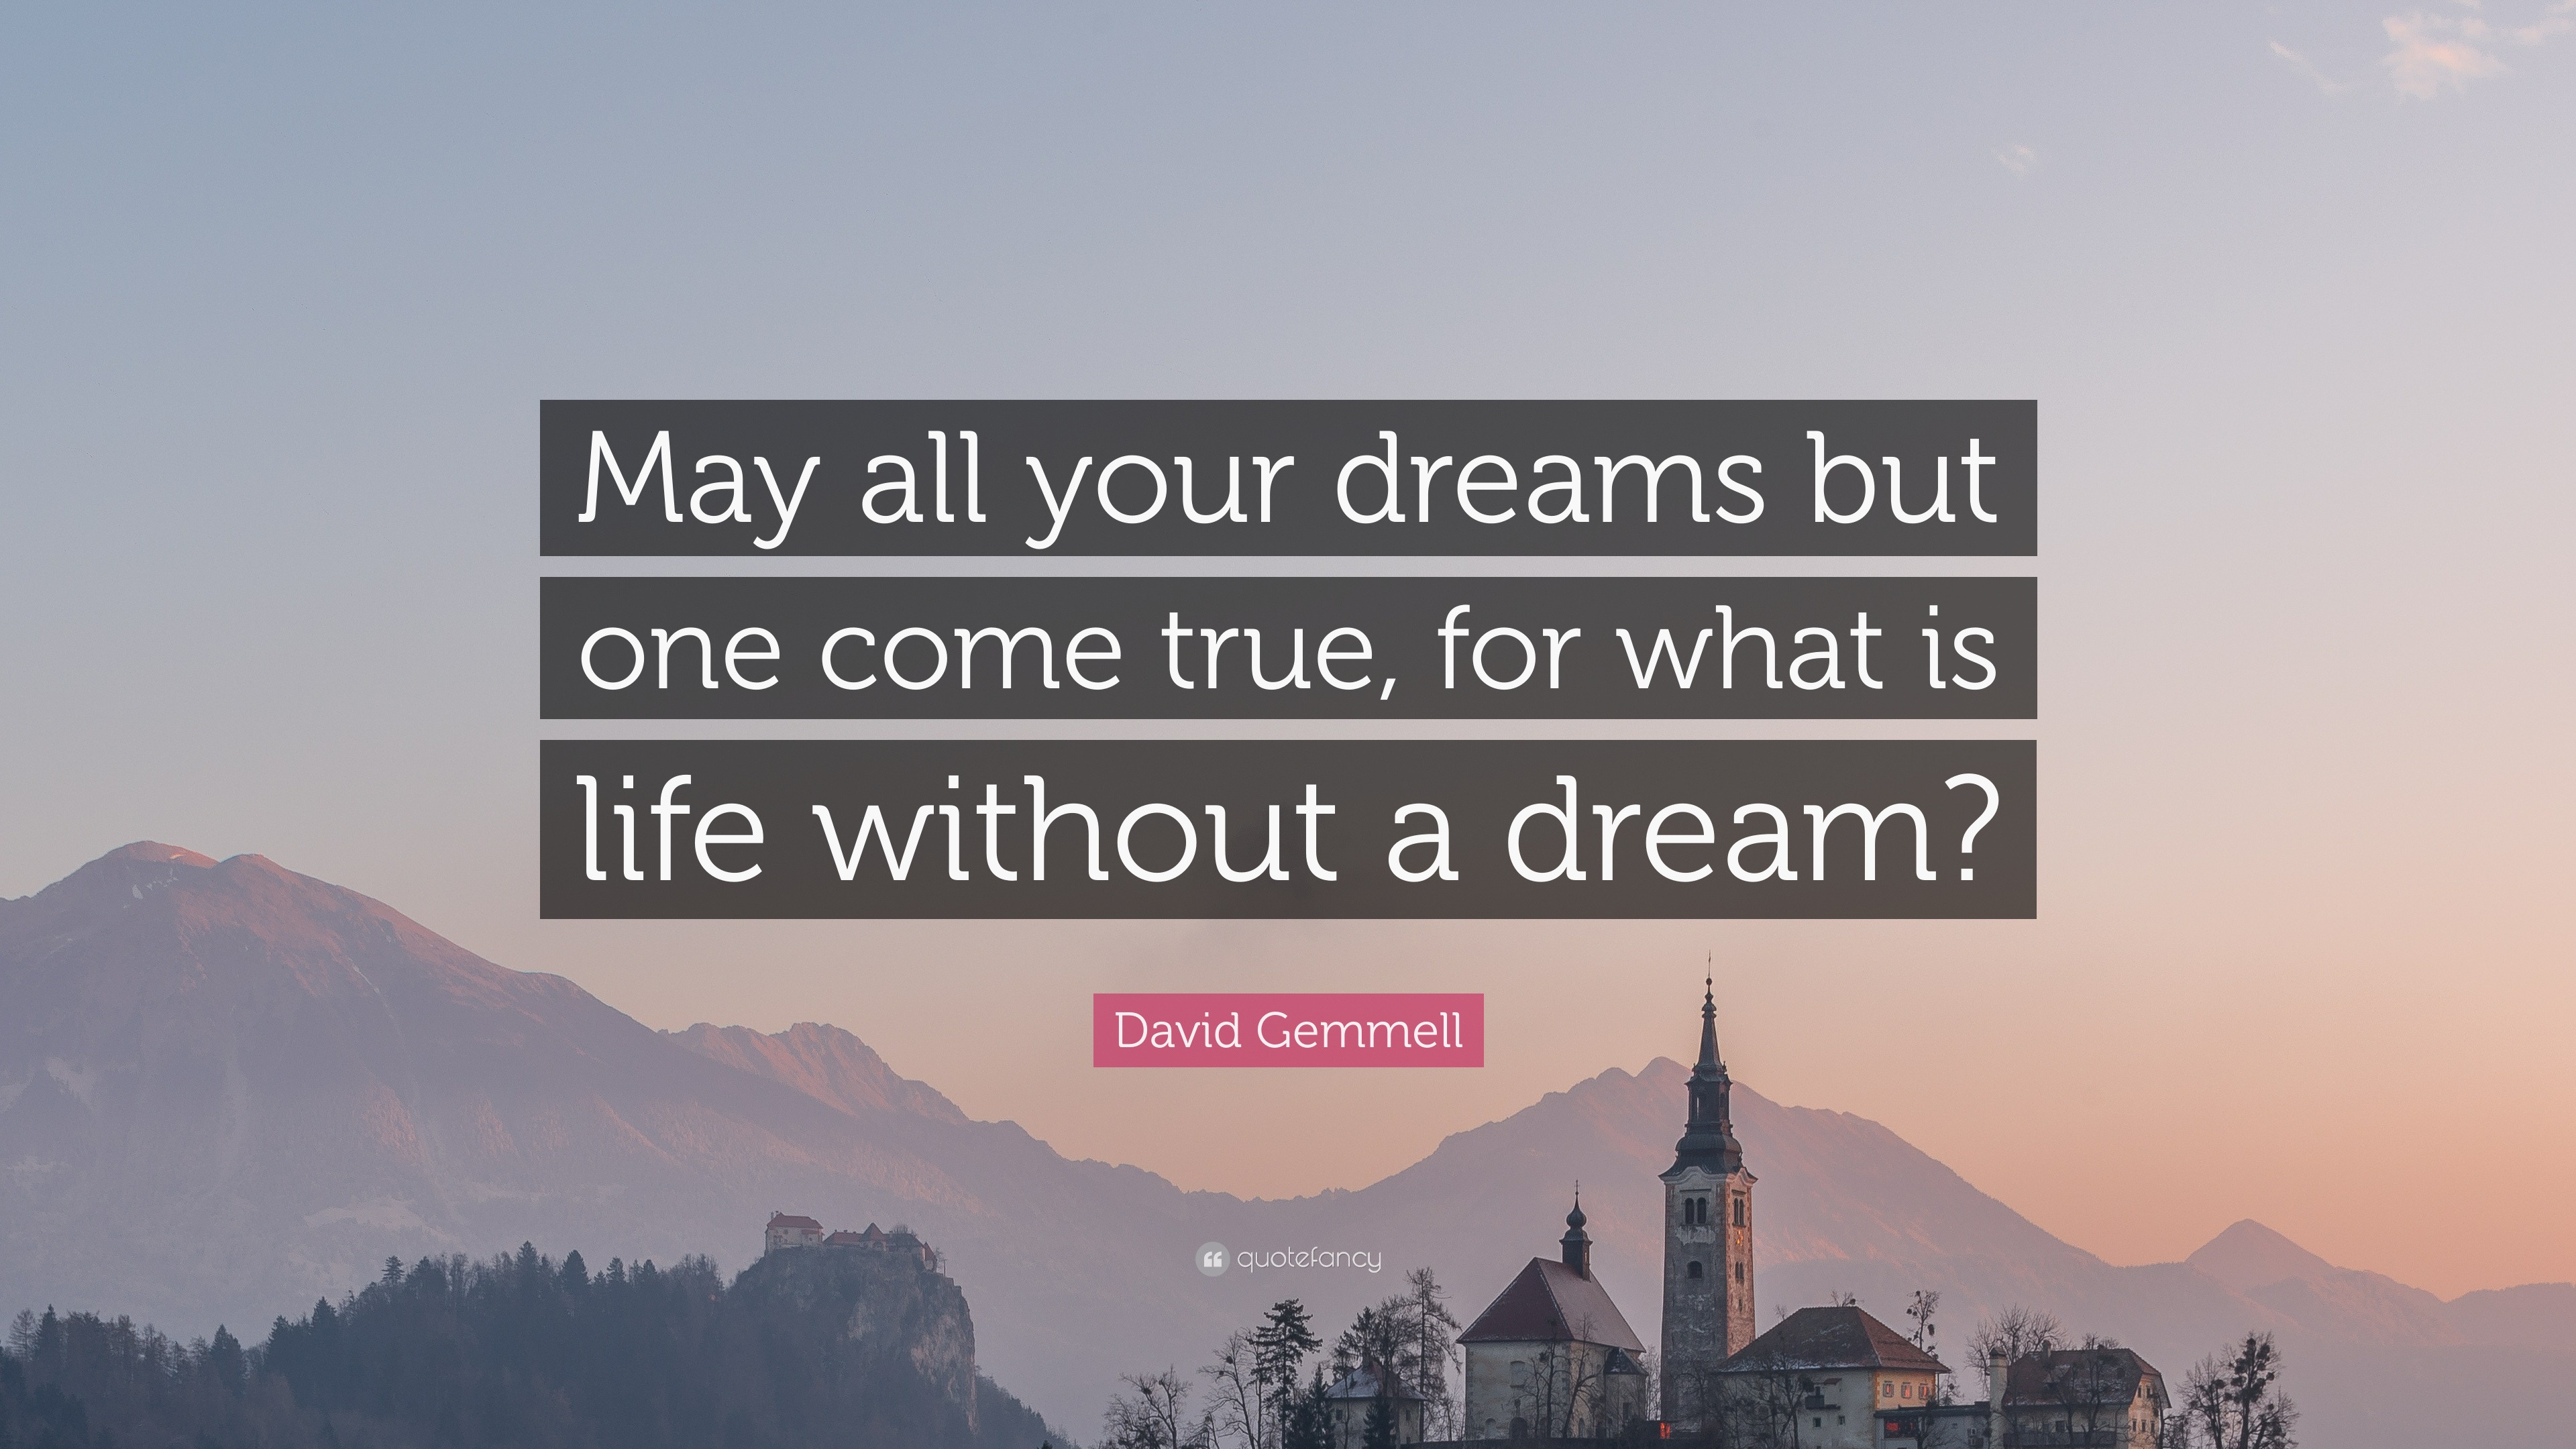 David Gemmell Quote: “May all your dreams but one come true, for